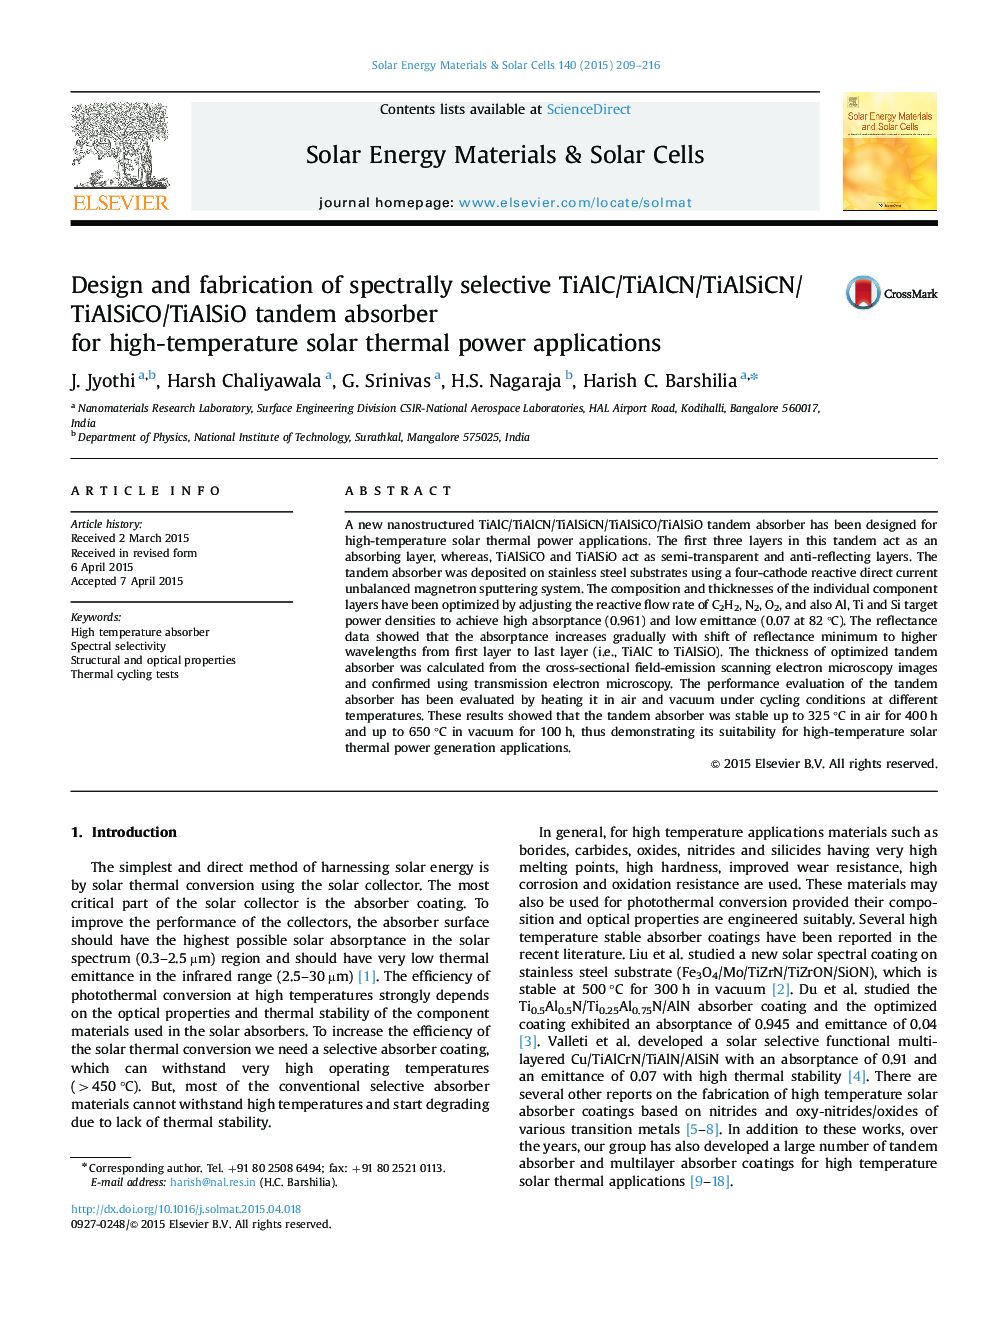 Design and fabrication of spectrally selective TiAlC/TiAlCN/TiAlSiCN/TiAlSiCO/TiAlSiO tandem absorber for high-temperature solar thermal power applications